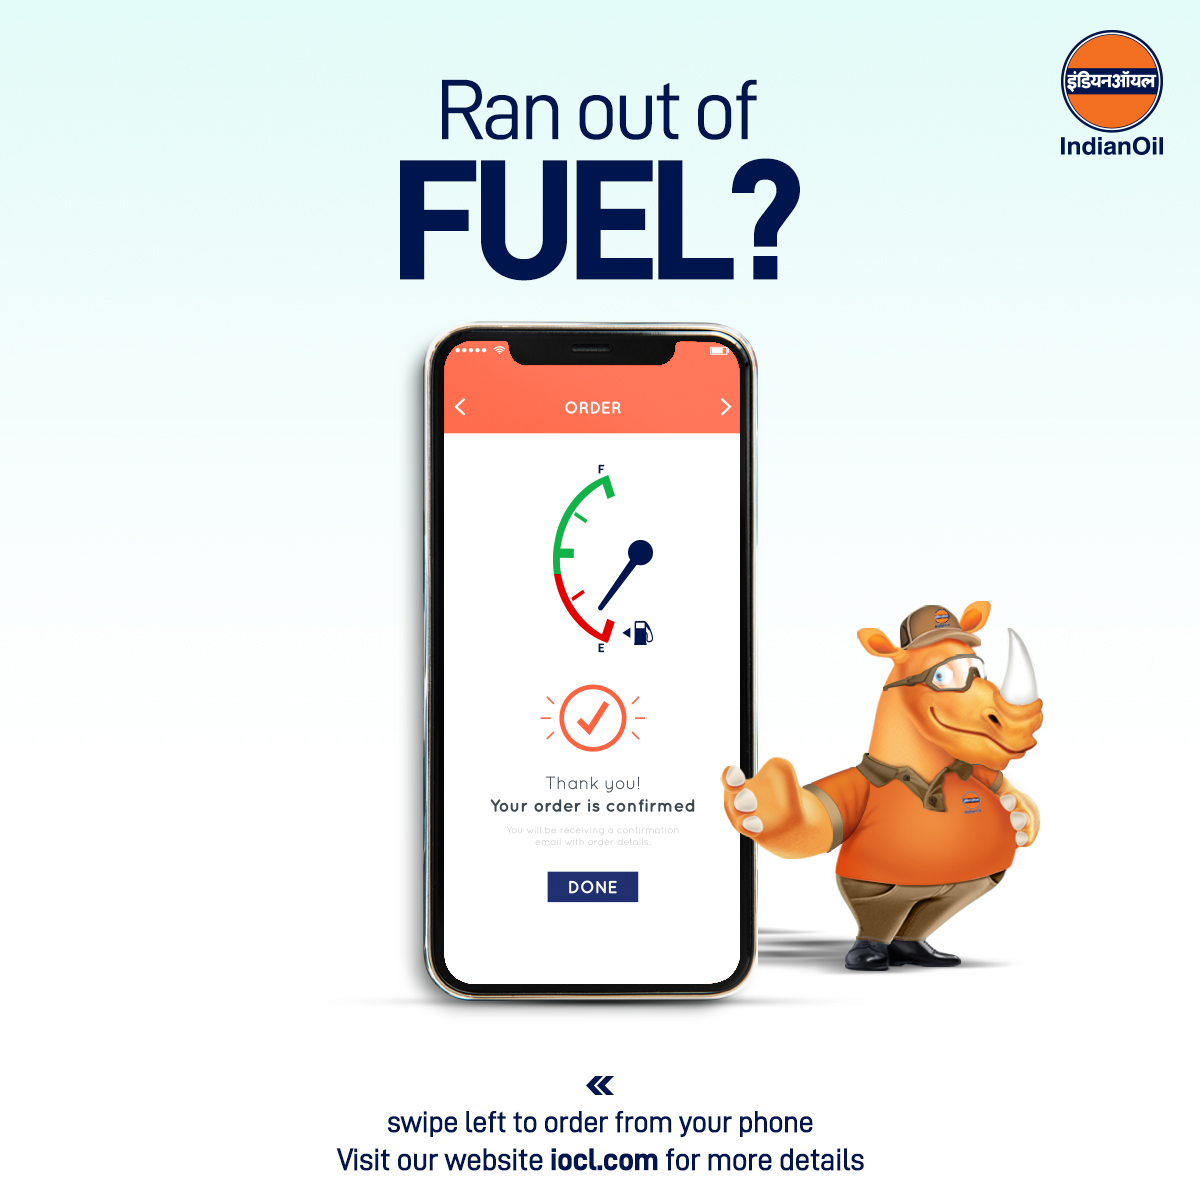 #IndianOil offers diesel at doorstep to Industrial/commercial customers! Check out iocl.com/pages/fuel-at-… to avail our hassle-free doorstep service, Fuel@call.